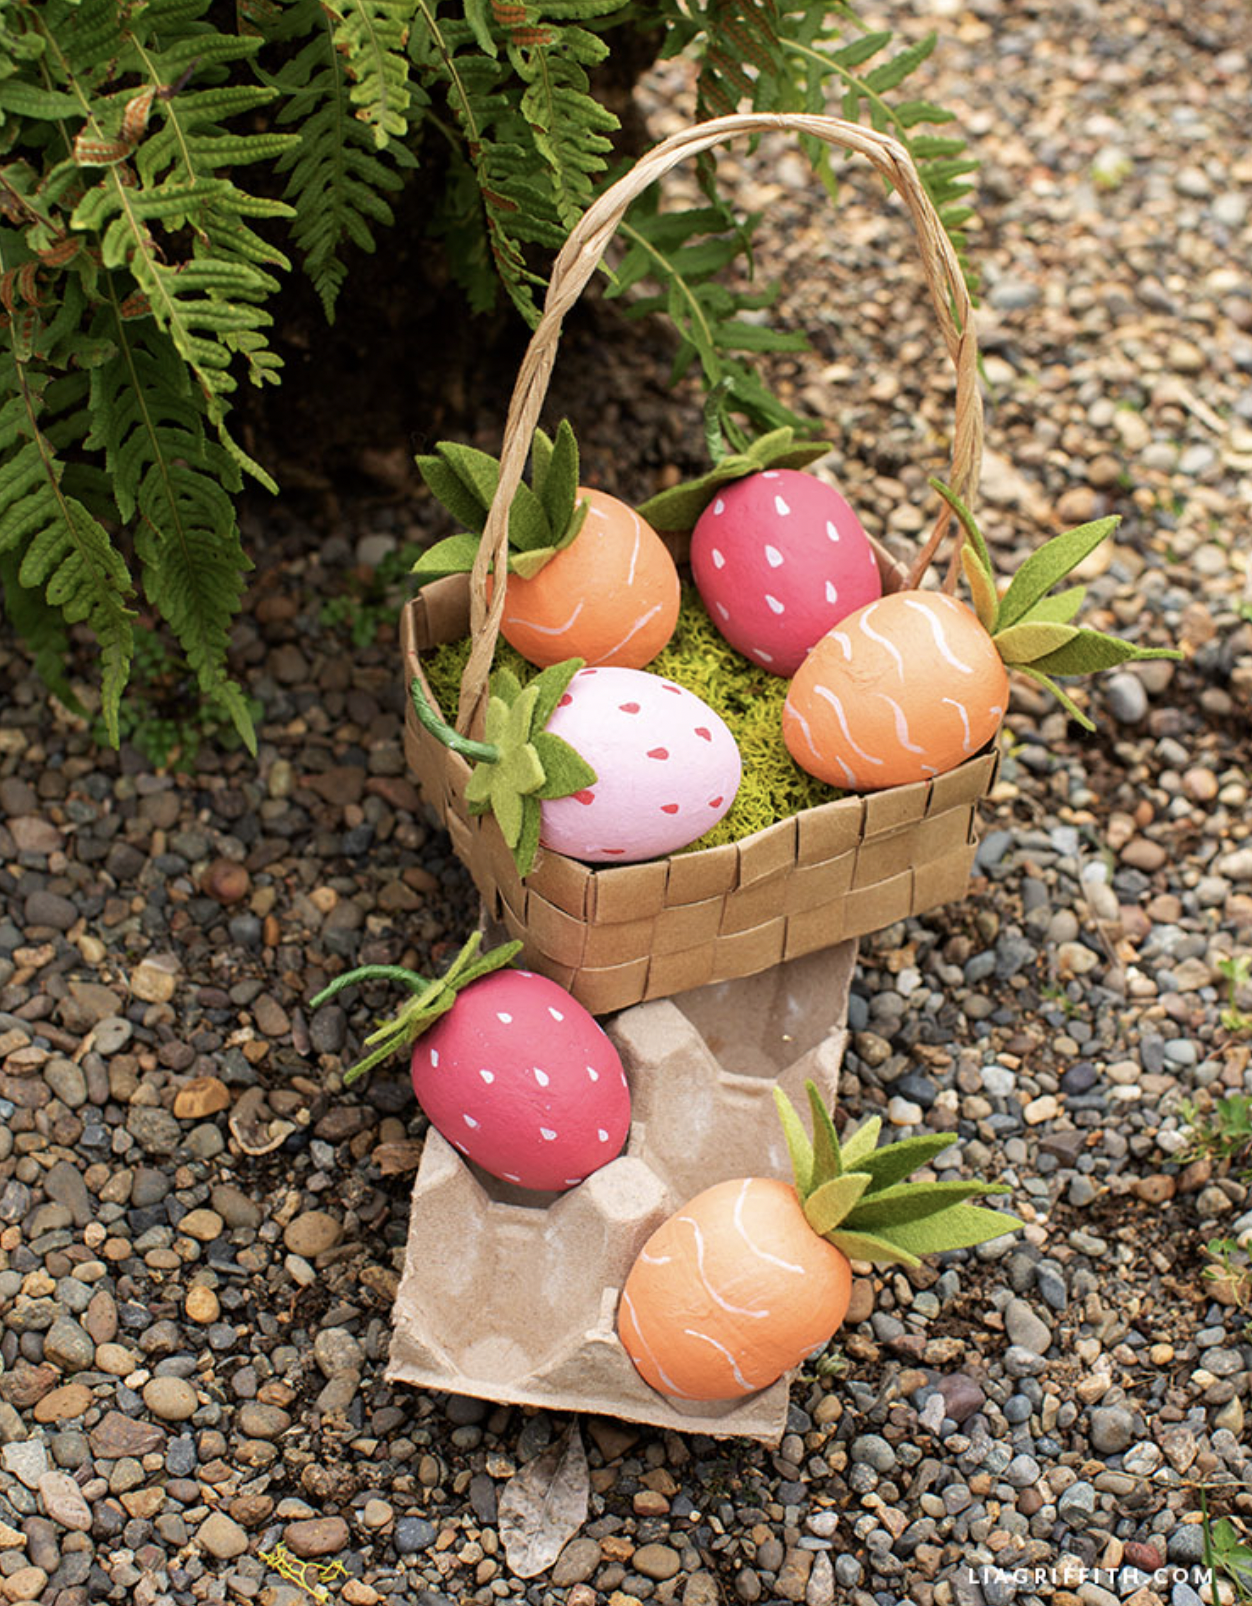 <p>Easter Sunday is right around the corner, so now is the time to get <em>crackin'</em> on your <a href="https://www.thepioneerwoman.com/holidays-celebrations/g35472251/easter-crafts-ideas/">Easter crafts</a>! (Sorry, we can never resist a good <a href="https://www.thepioneerwoman.com/holidays-celebrations/a35448409/easter-puns/">Easter pun</a>!) Of course, your holiday wouldn't be complete without some fun <a href="https://www.thepioneerwoman.com/home-lifestyle/crafts-diy/g35374475/easter-egg-designs/">Easter egg designs</a>, and if you're looking for ideas that go way beyond <a href="https://www.thepioneerwoman.com/home-lifestyle/crafts-diy/g35393659/best-easter-egg-dye-kits/">dye kits</a>, then you've come to the right place. We've rounded up the most creative egg painting techniques and ideas to inspire your mini masterpieces. </p><p>There's something here for every bunny, including DIY eggs featuring glamorous gold leaf or glitter designs, adorable animal motifs, and marbled, watercolor, and tie-dye effects. There's even a tutorial for mood ring Easter eggs that change color with heat! Many of these ideas will give your friends and family a giggle, like the sassy bouffant hair eggs or the eggs painted to look like hamburgers. These painted eggs are more than just conversation pieces—they would also make great <a href="https://www.thepioneerwoman.com/holidays-celebrations/gifts/g35432577/best-easter-basket-gifts/">Easter basket gifts</a>, or even <a href="https://www.thepioneerwoman.com/food-cooking/meals-menus/g35590834/easter-appetizers/">Easter appetizers</a>. You should definitely use them as DIY <a href="https://www.thepioneerwoman.com/home-lifestyle/crafts-diy/g35323396/easter-decorations/">Easter decorations</a>, too! </p><p>Whether you set them out as <a href="https://www.thepioneerwoman.com/home-lifestyle/crafts-diy/g35374686/easter-table-decorations/">Easter centerpieces</a> or use them as <a href="https://www.thepioneerwoman.com/home-lifestyle/crafts-diy/g35375043/outdoor-easter-decorations/">outdoor Easter decorations</a> on your porch, they'll make the most festive additions. And of course, you can put them to good use in your annual <a href="https://www.thepioneerwoman.com/holidays-celebrations/g35535020/easter-egg-hunt-ideas/">Easter egg hunt</a>. You can't go wrong with any of these egg-cellent Easter egg painting techniques, so pick the one that speaks to you, and hop to it!</p>